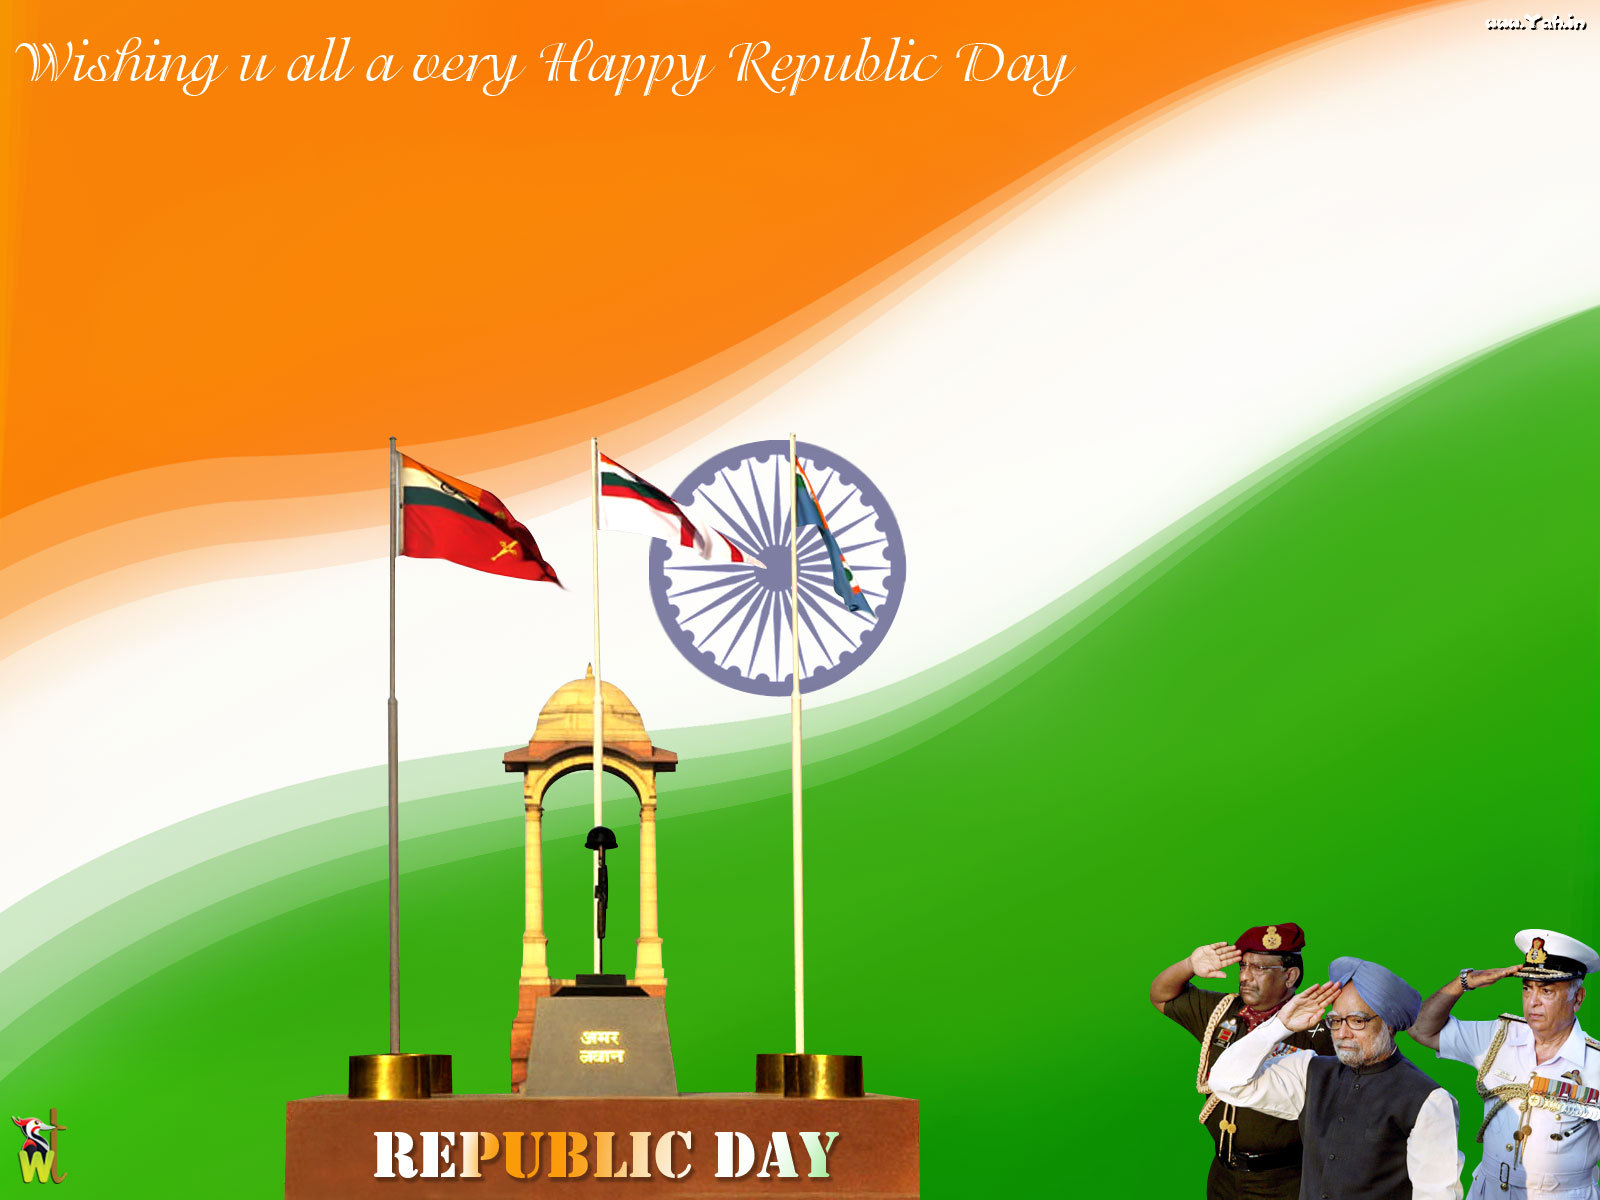 Republic Day National Flag Of India - HD Wallpaper 